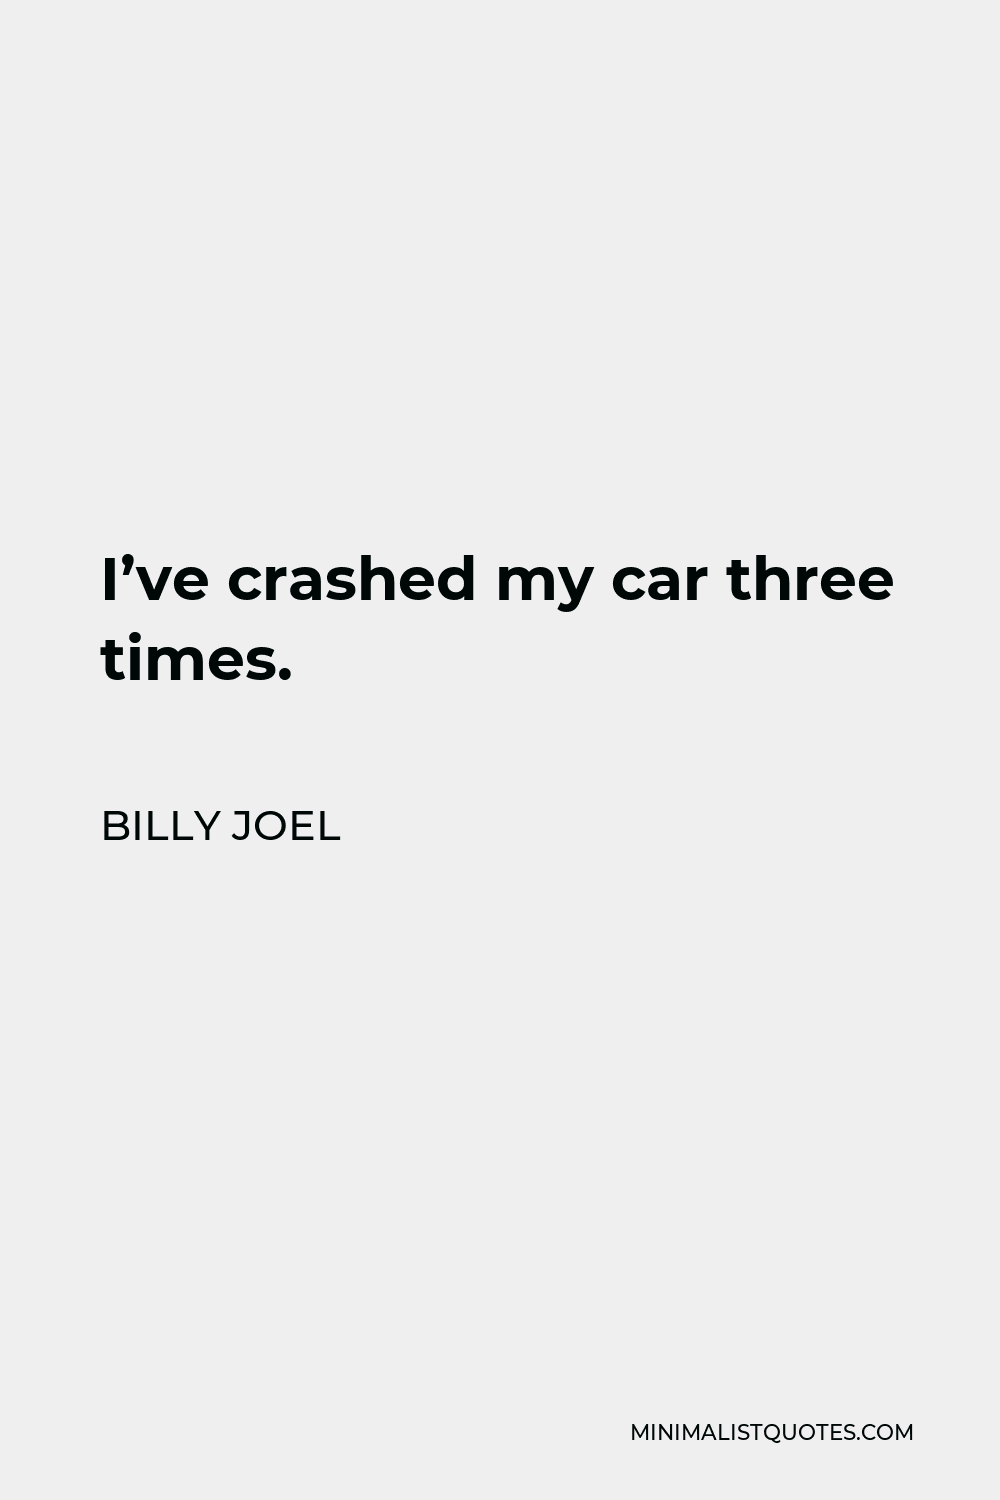 Billy Joel Quote - I’ve crashed my car three times.